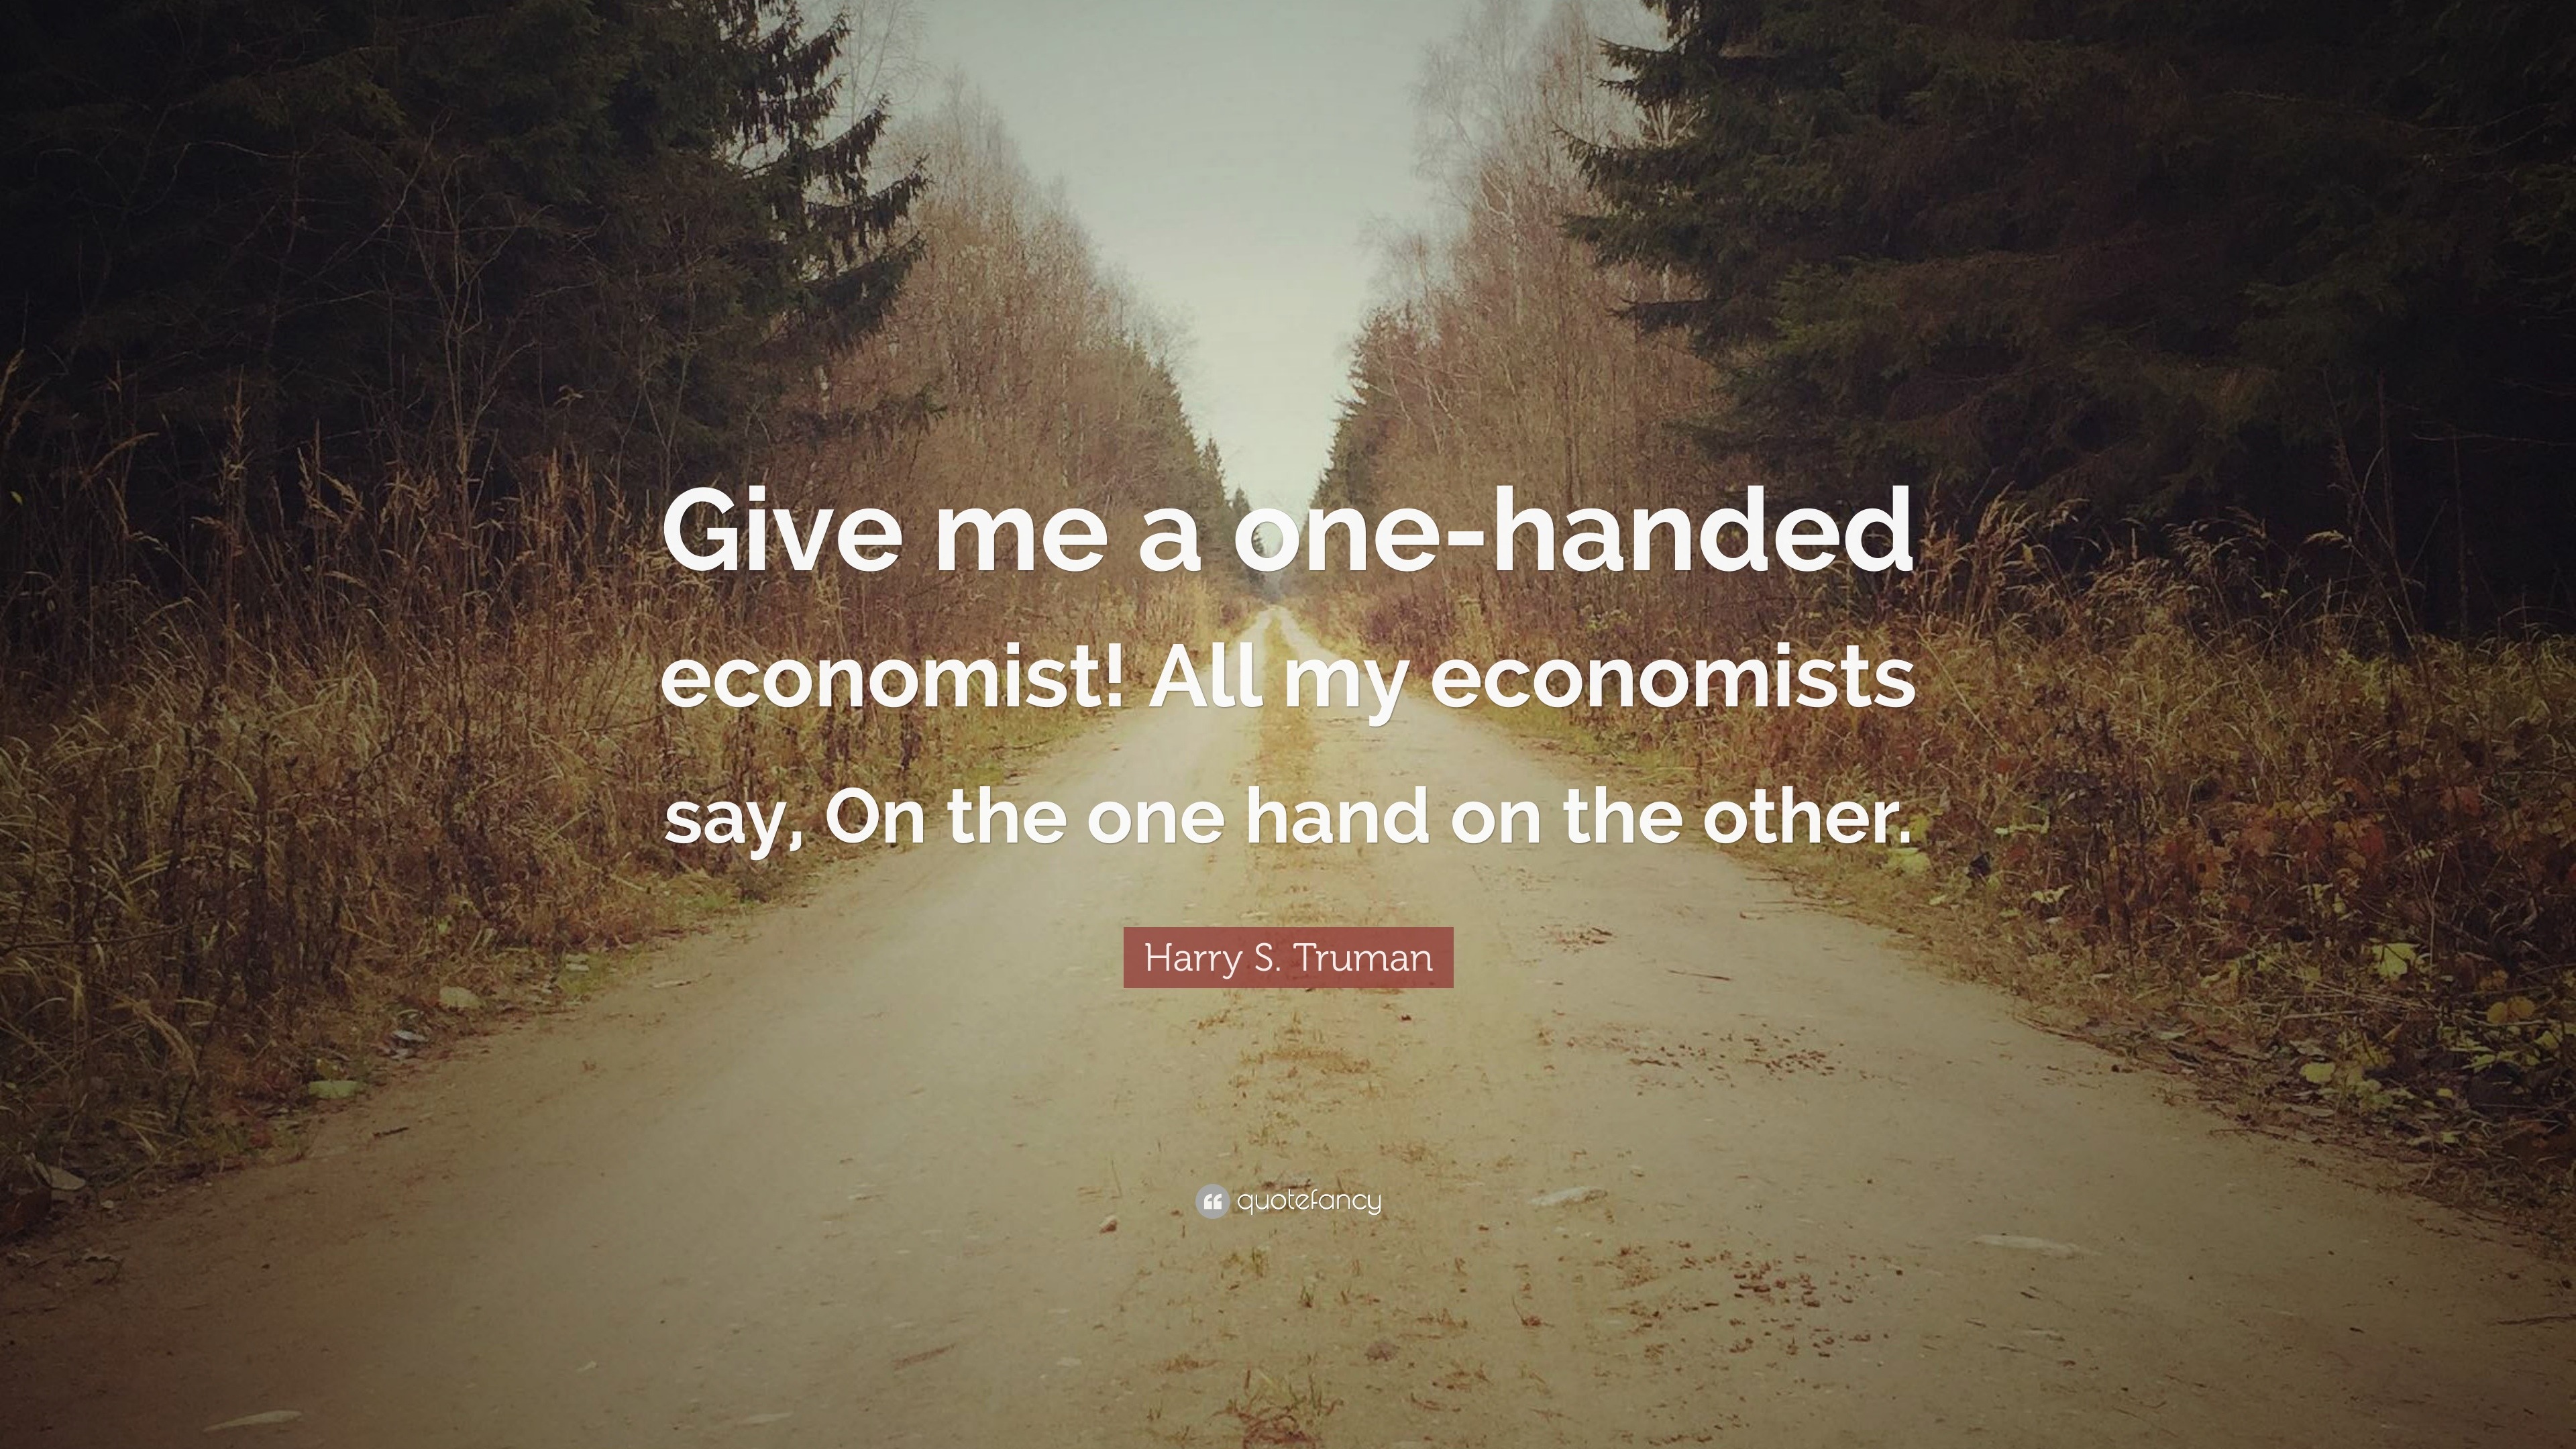 Harry S. Truman Quote: “Give me a one-handed economist! All my